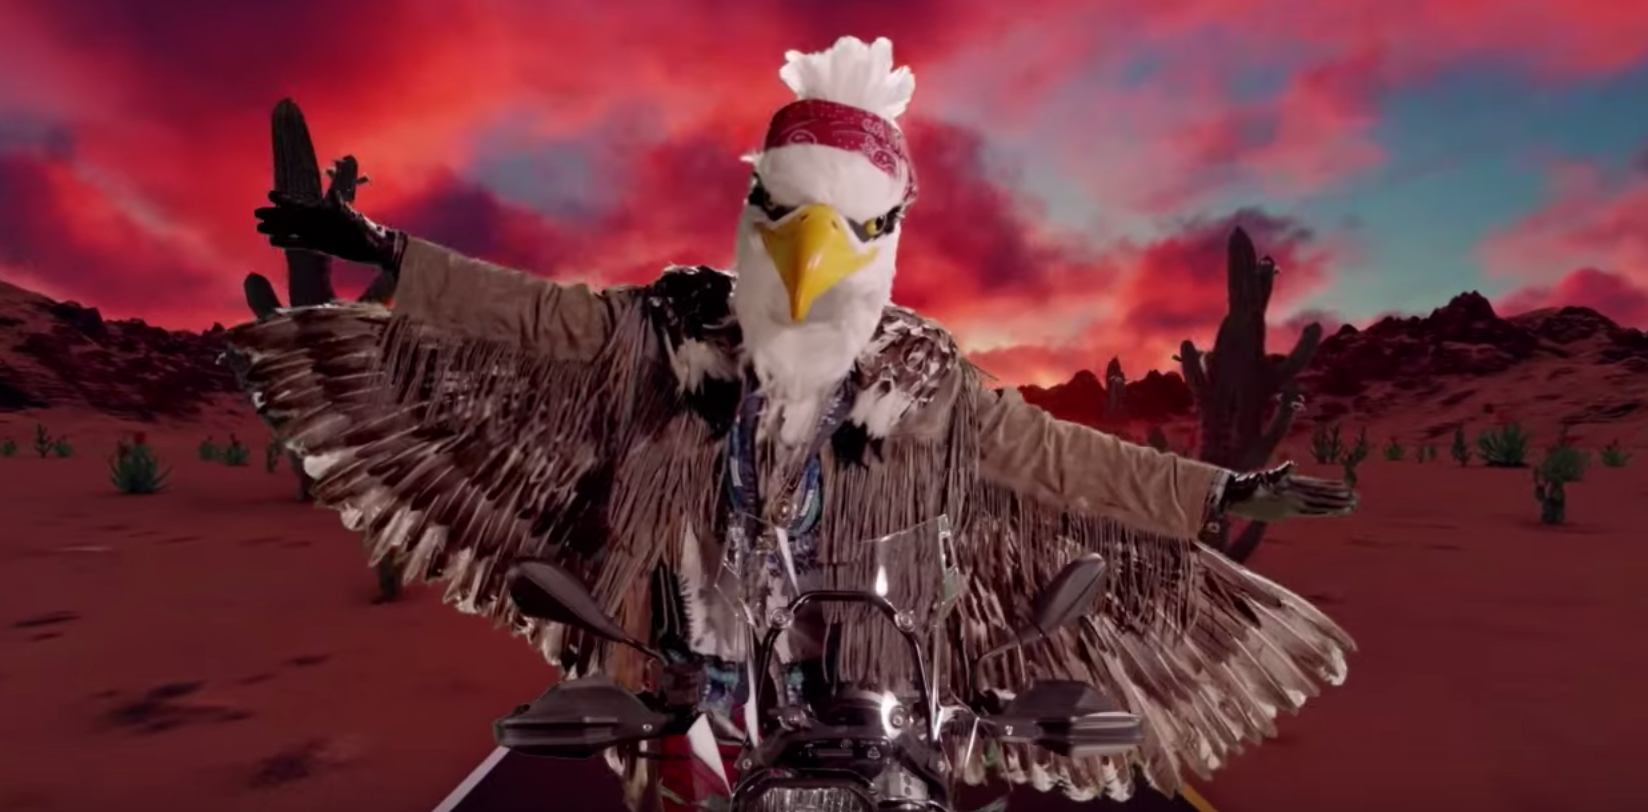 Who Is the Eagle in 'The Masked Singer' Season 2? Clues Point to This Rock Star